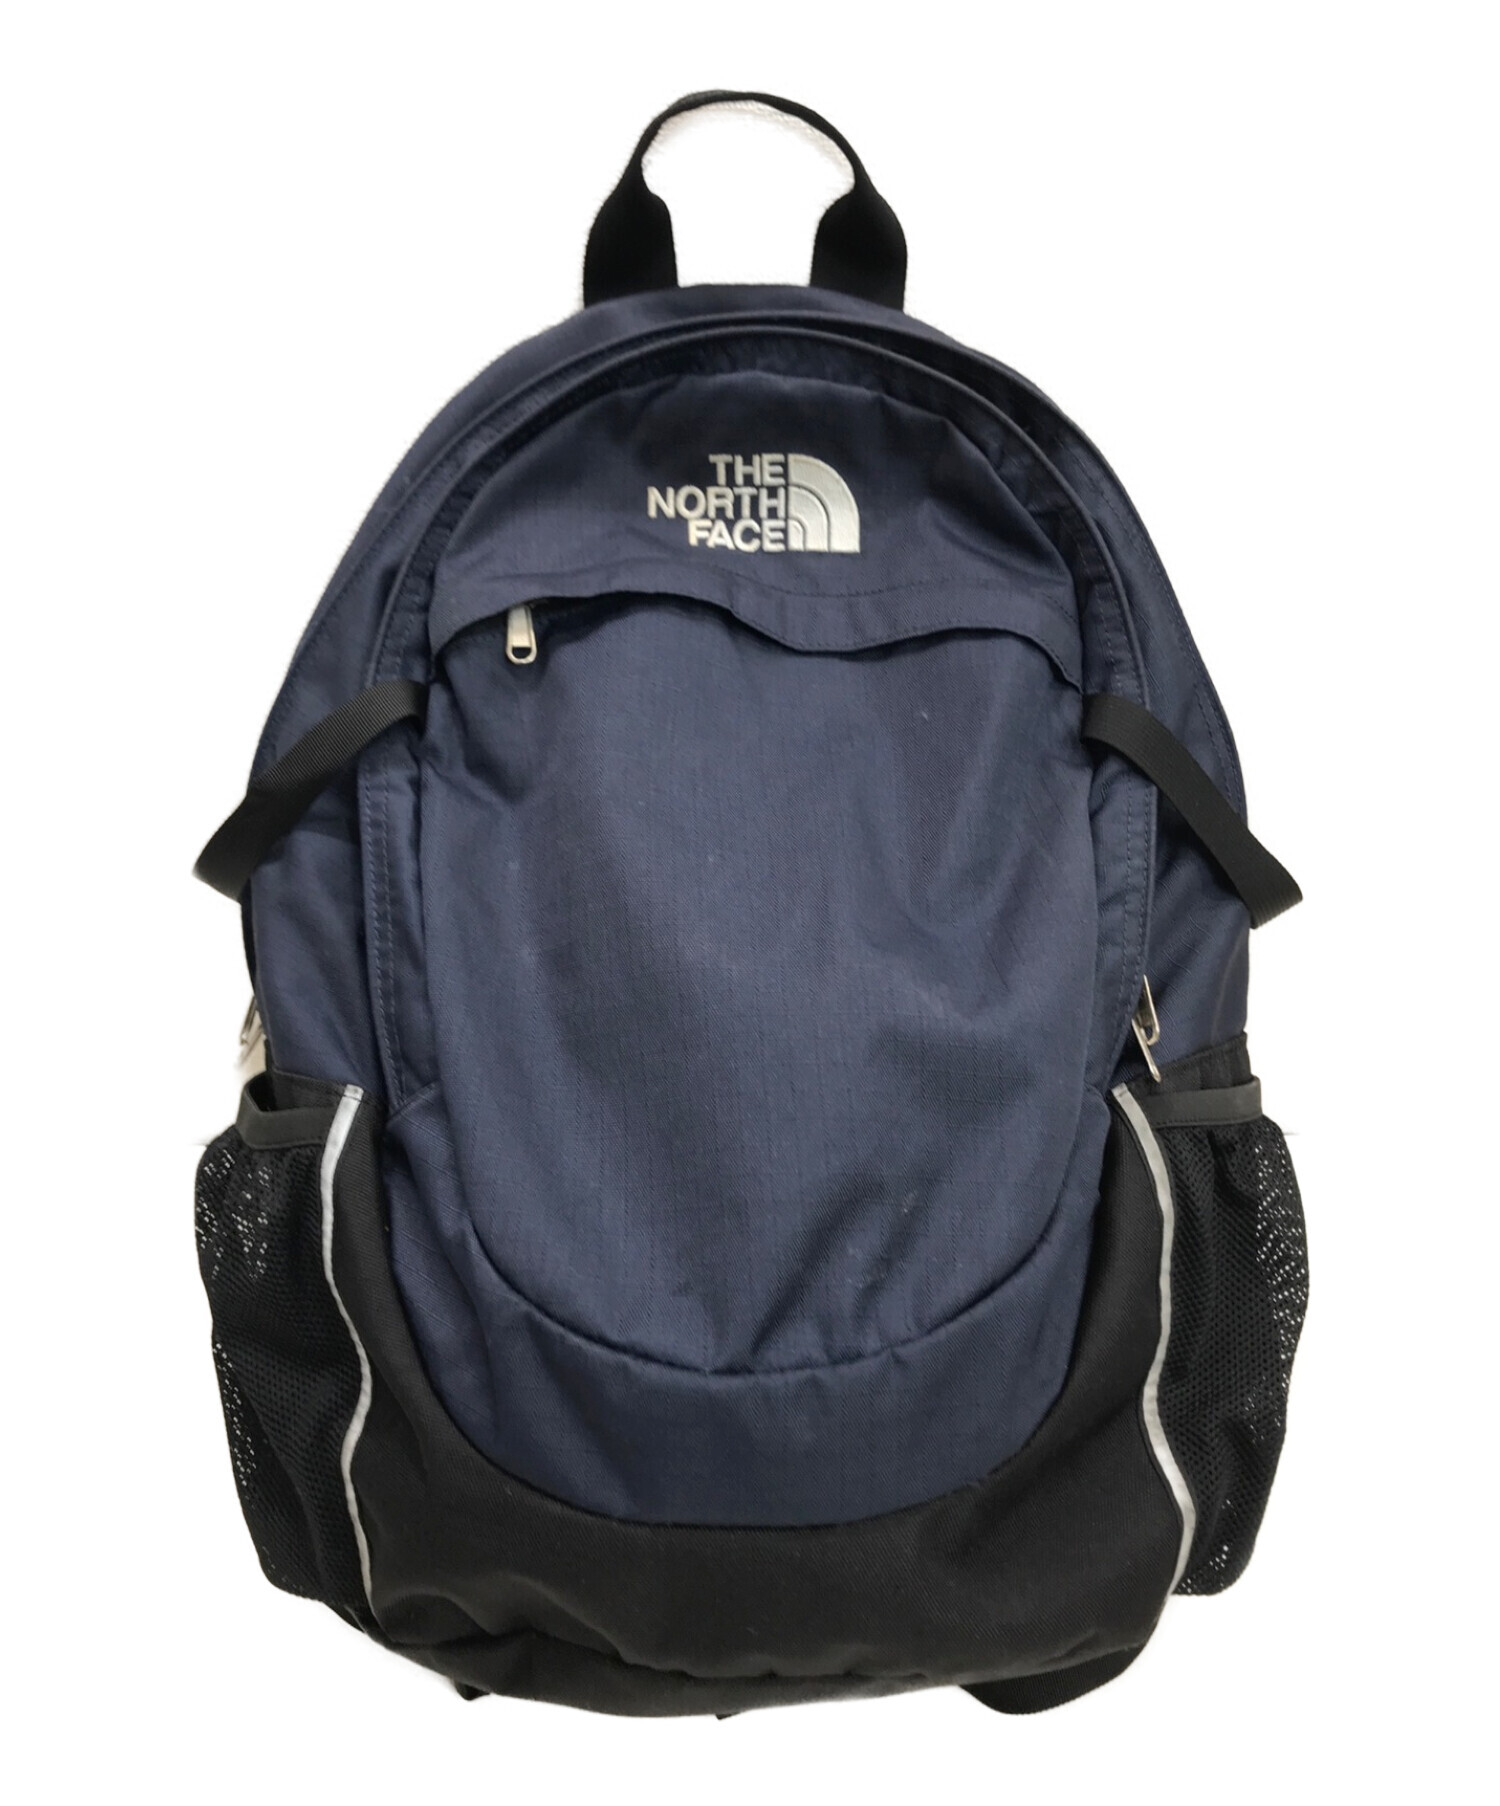 THE NORTH FACE リュックサック 紺 NM07711A